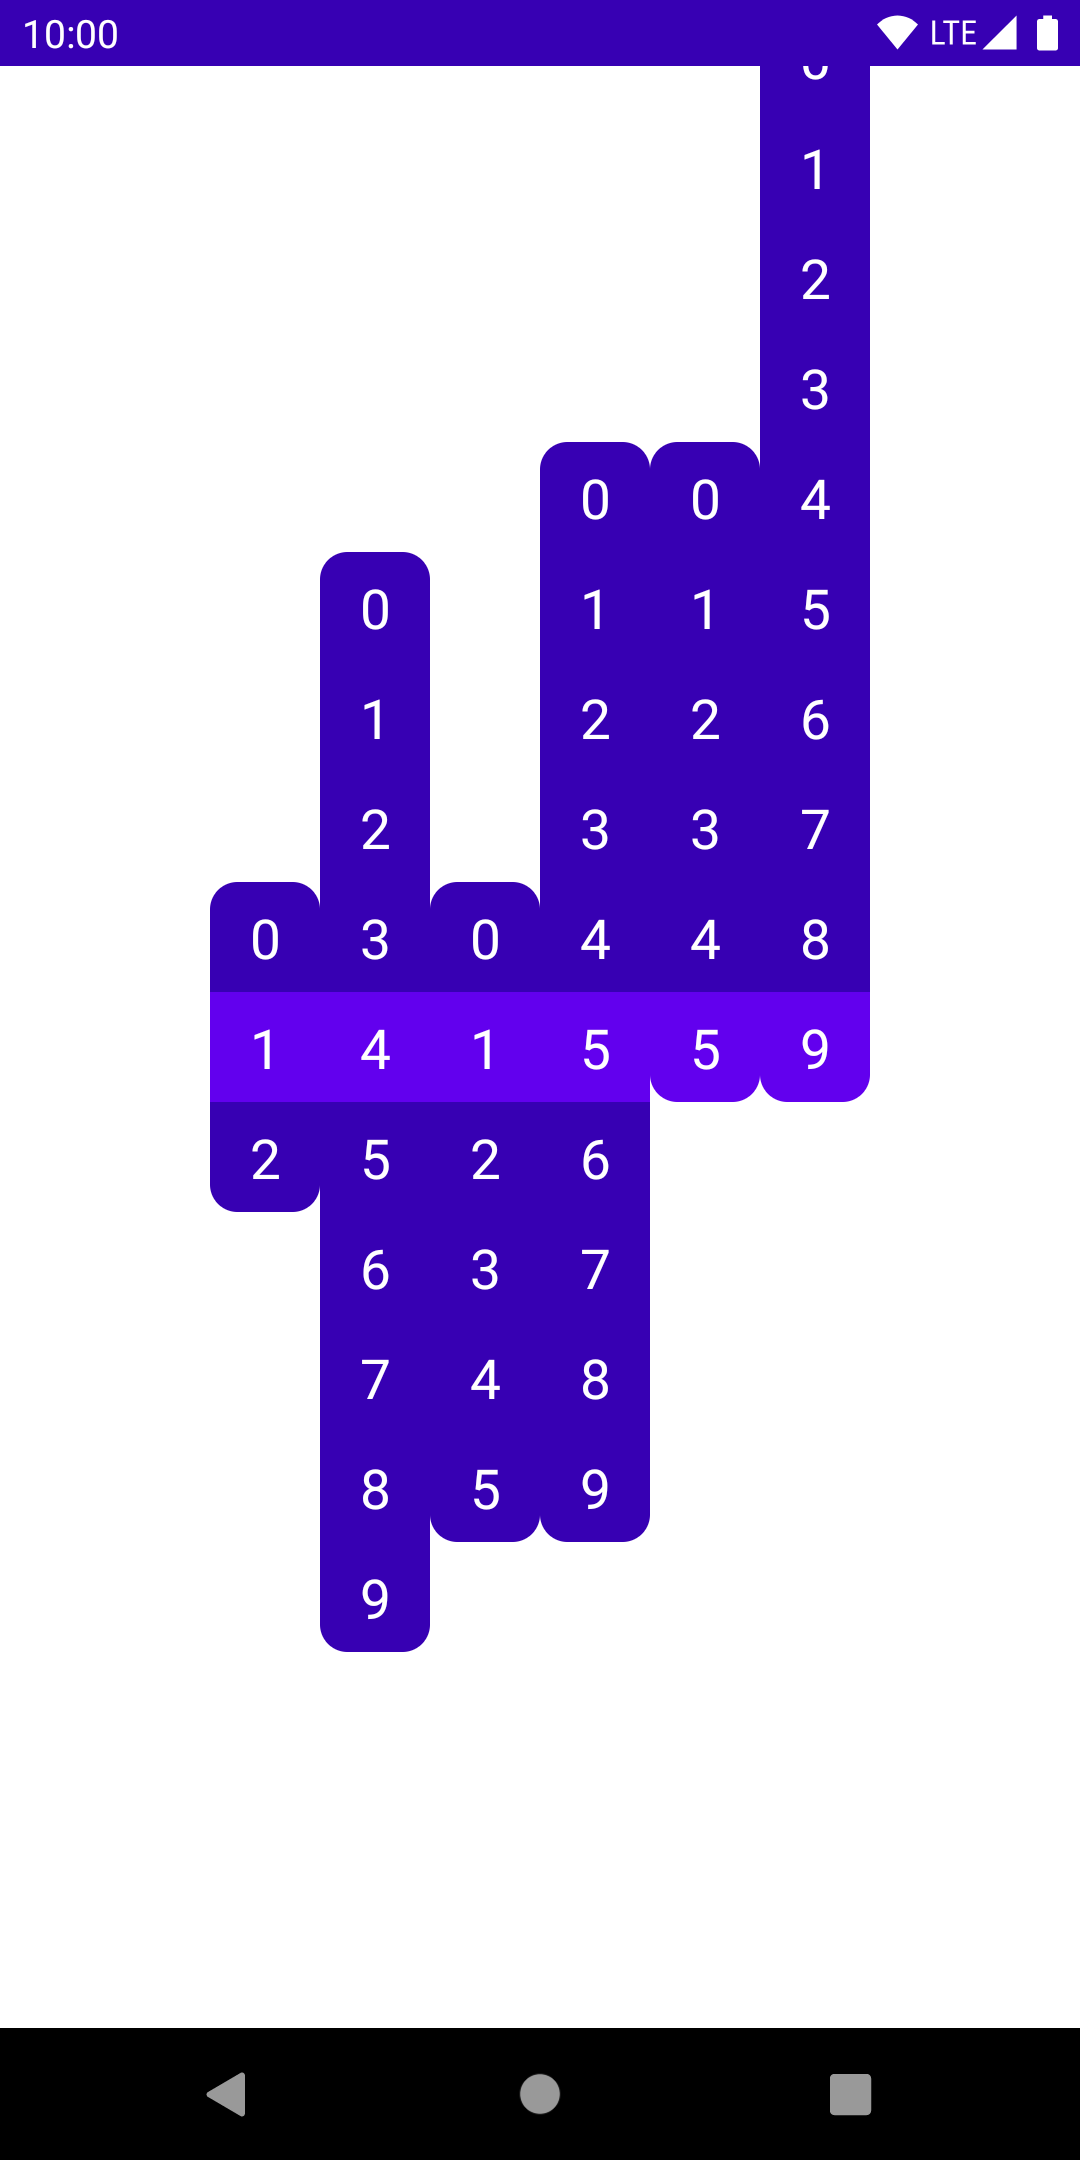 Multiple columns of digits, now aligned at their currently selected item